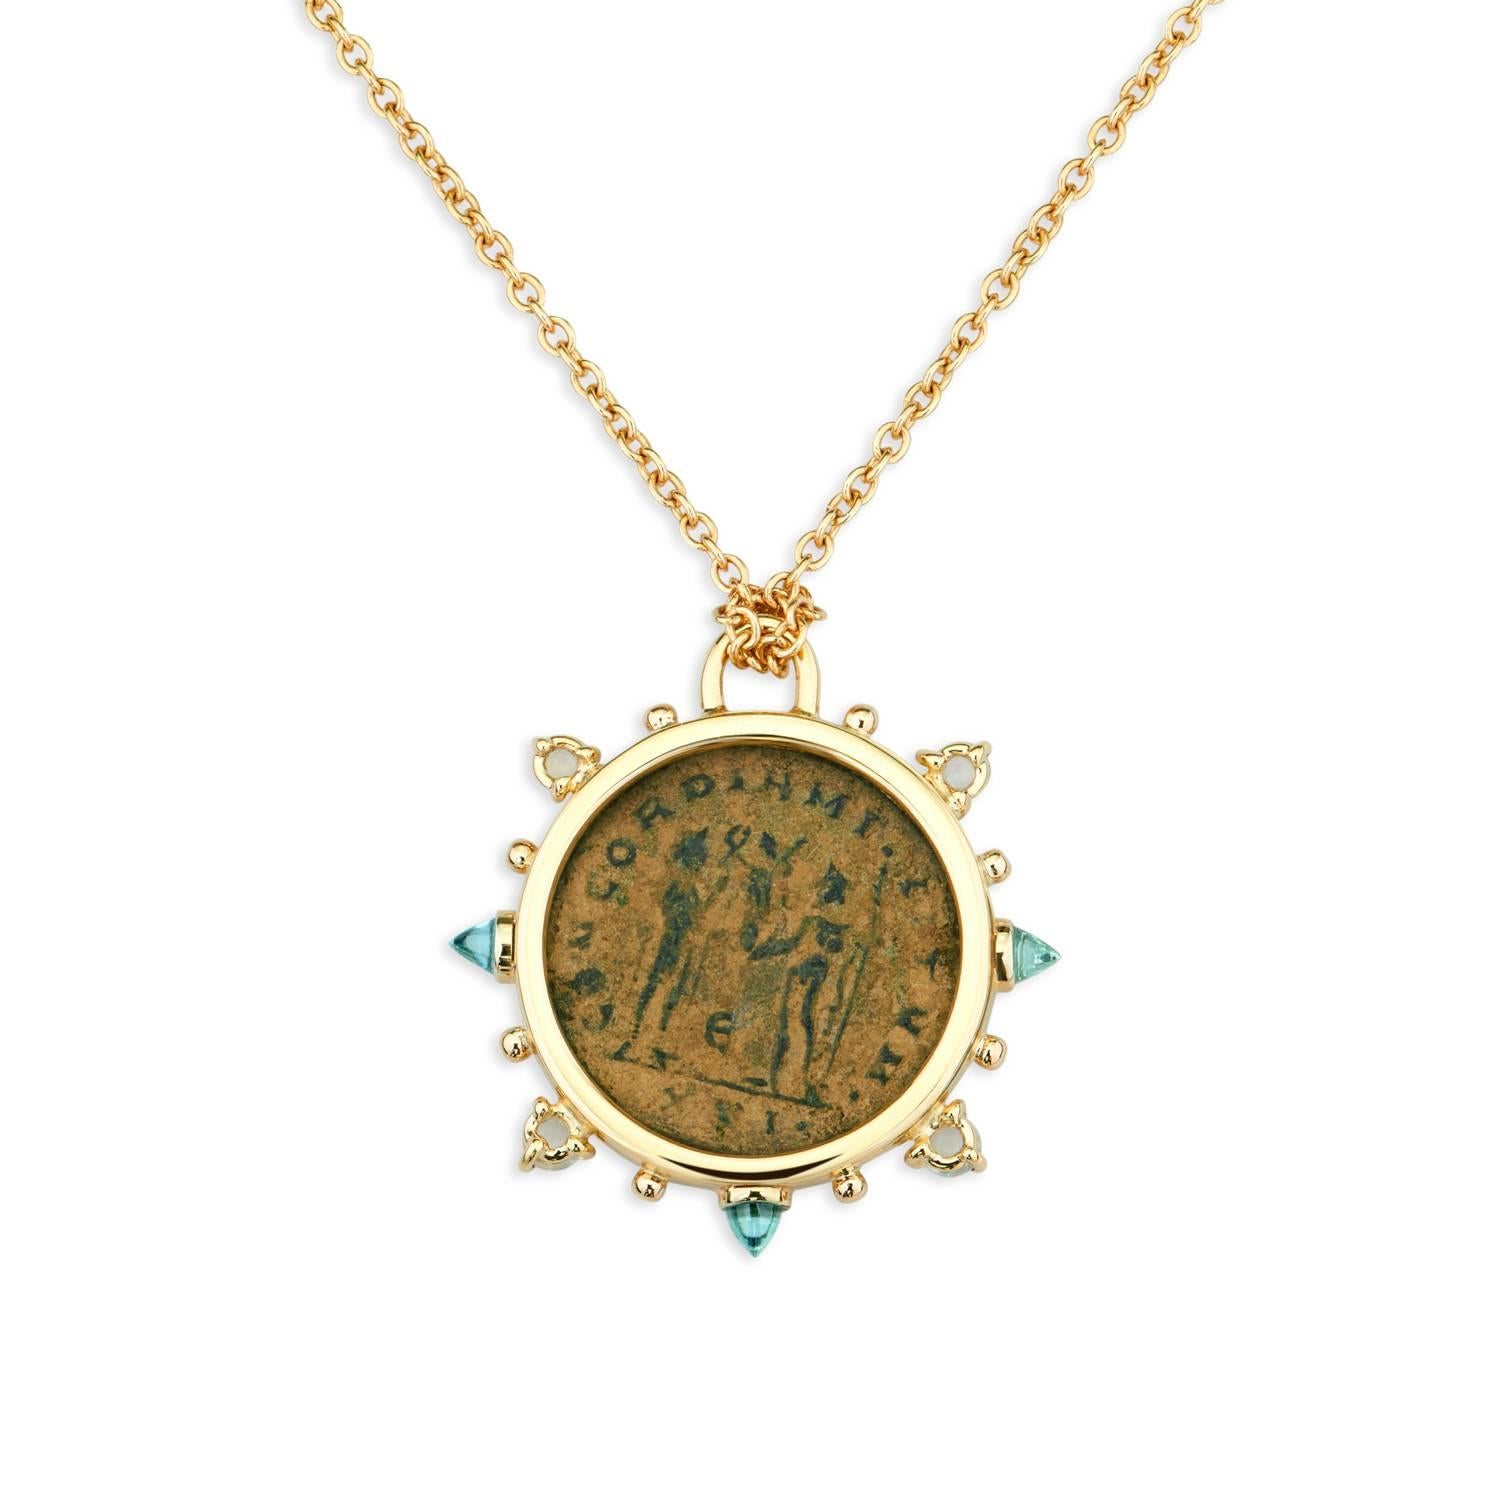 This DUBINI coin necklace from the 'Empires' collection features an authentic Roman bronze coin minted circa 295-299 A.D. set in 18K yellow gold with bullet blue topaz and moonstone cabochons.

Depicted on the coin: Diocletian, on the obverse and